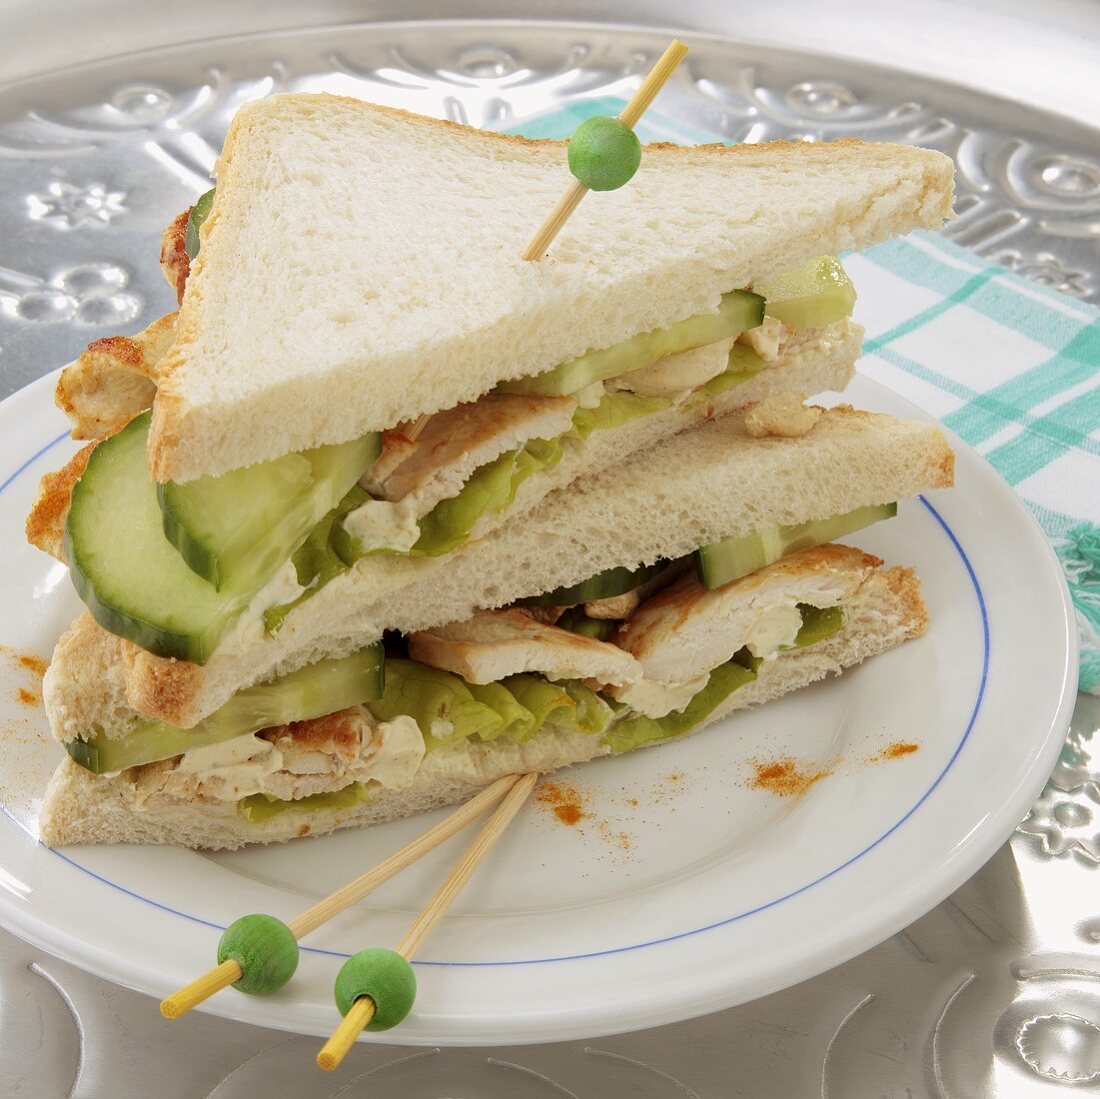 Chicken breast and cucumber sandwiches cut into triangles